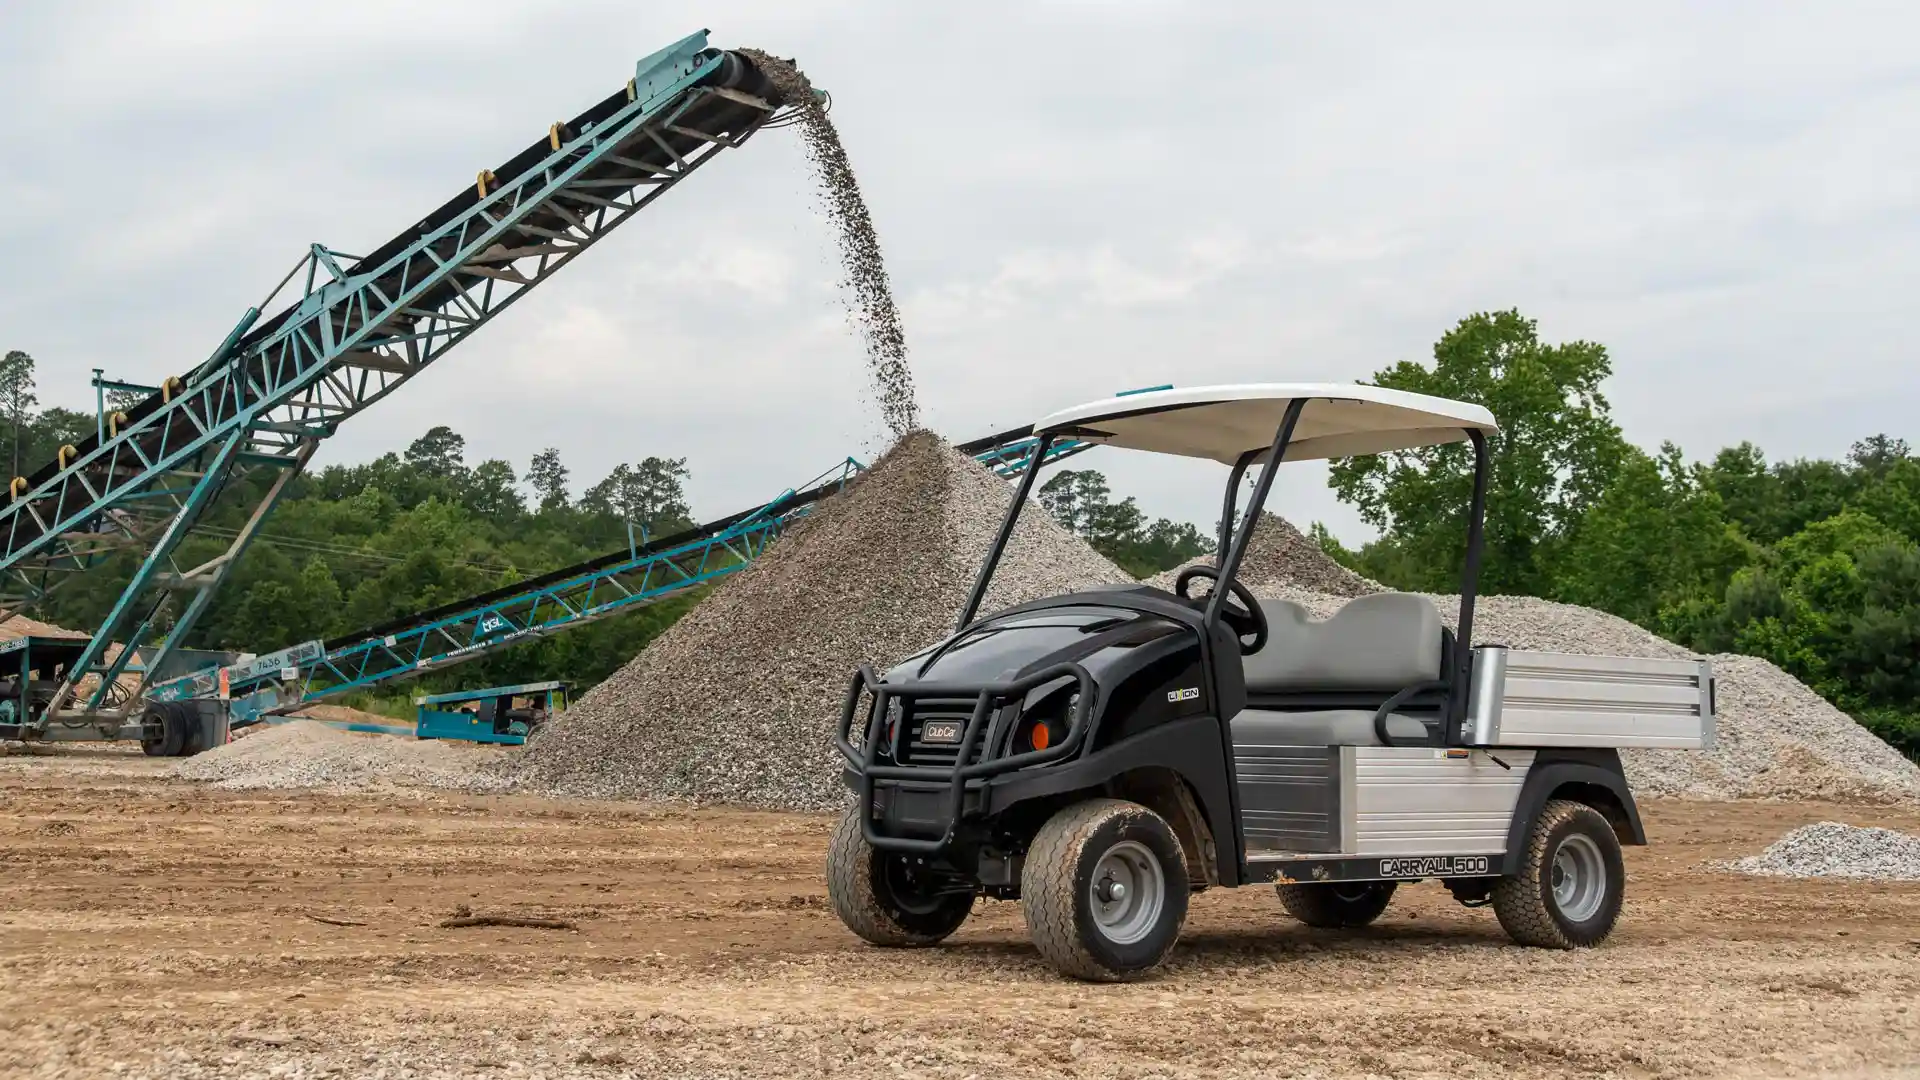 Carryall 500 utility vehicle at work site